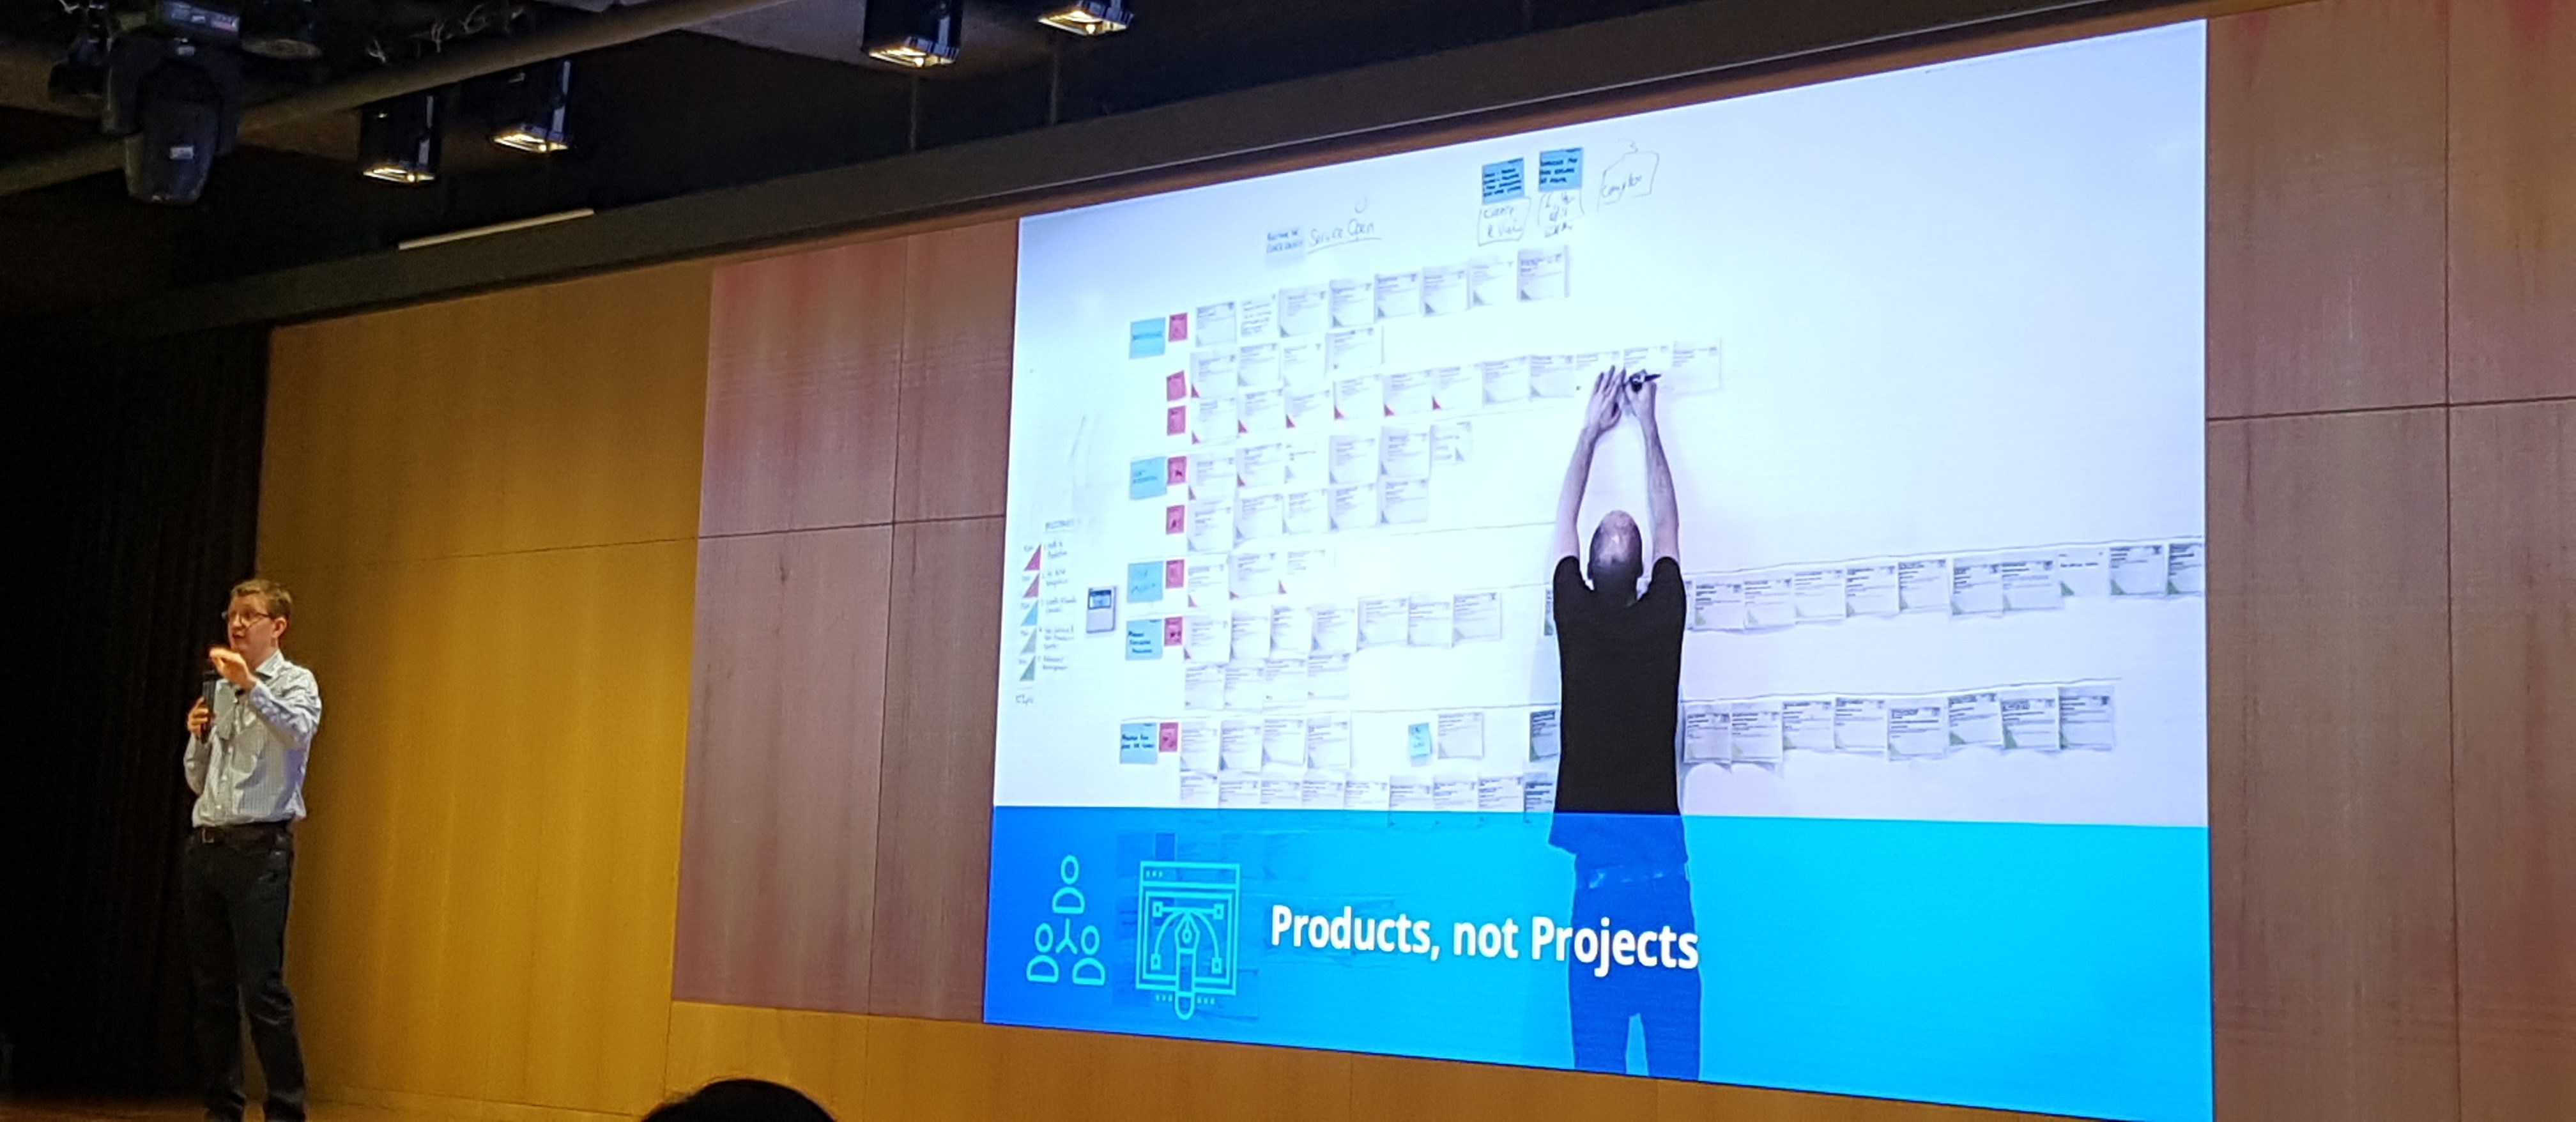 Products, not Projects